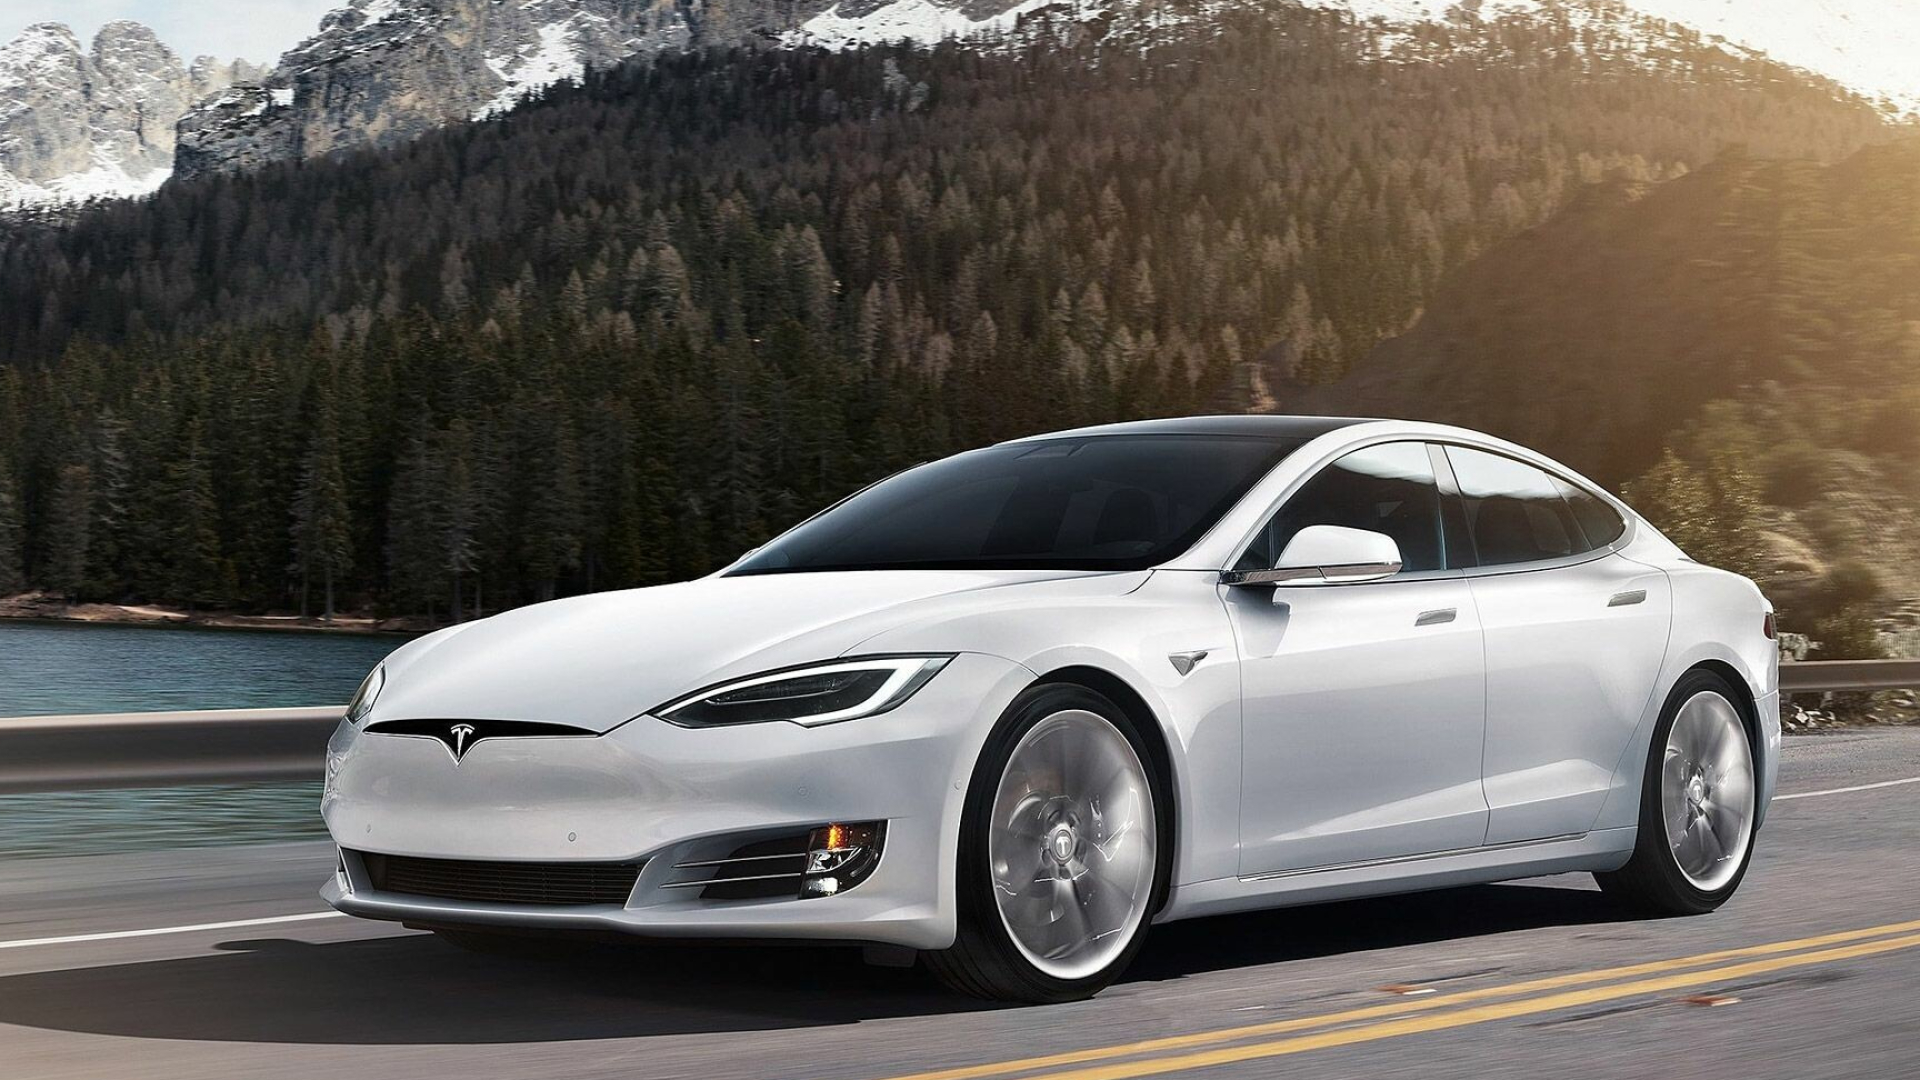 Tesla Model S: A battery-powered liftback car, Offers a range of 623 kilometers and accelerates from 0-100 km/h in just 2.5 seconds. 1920x1080 Full HD Background.